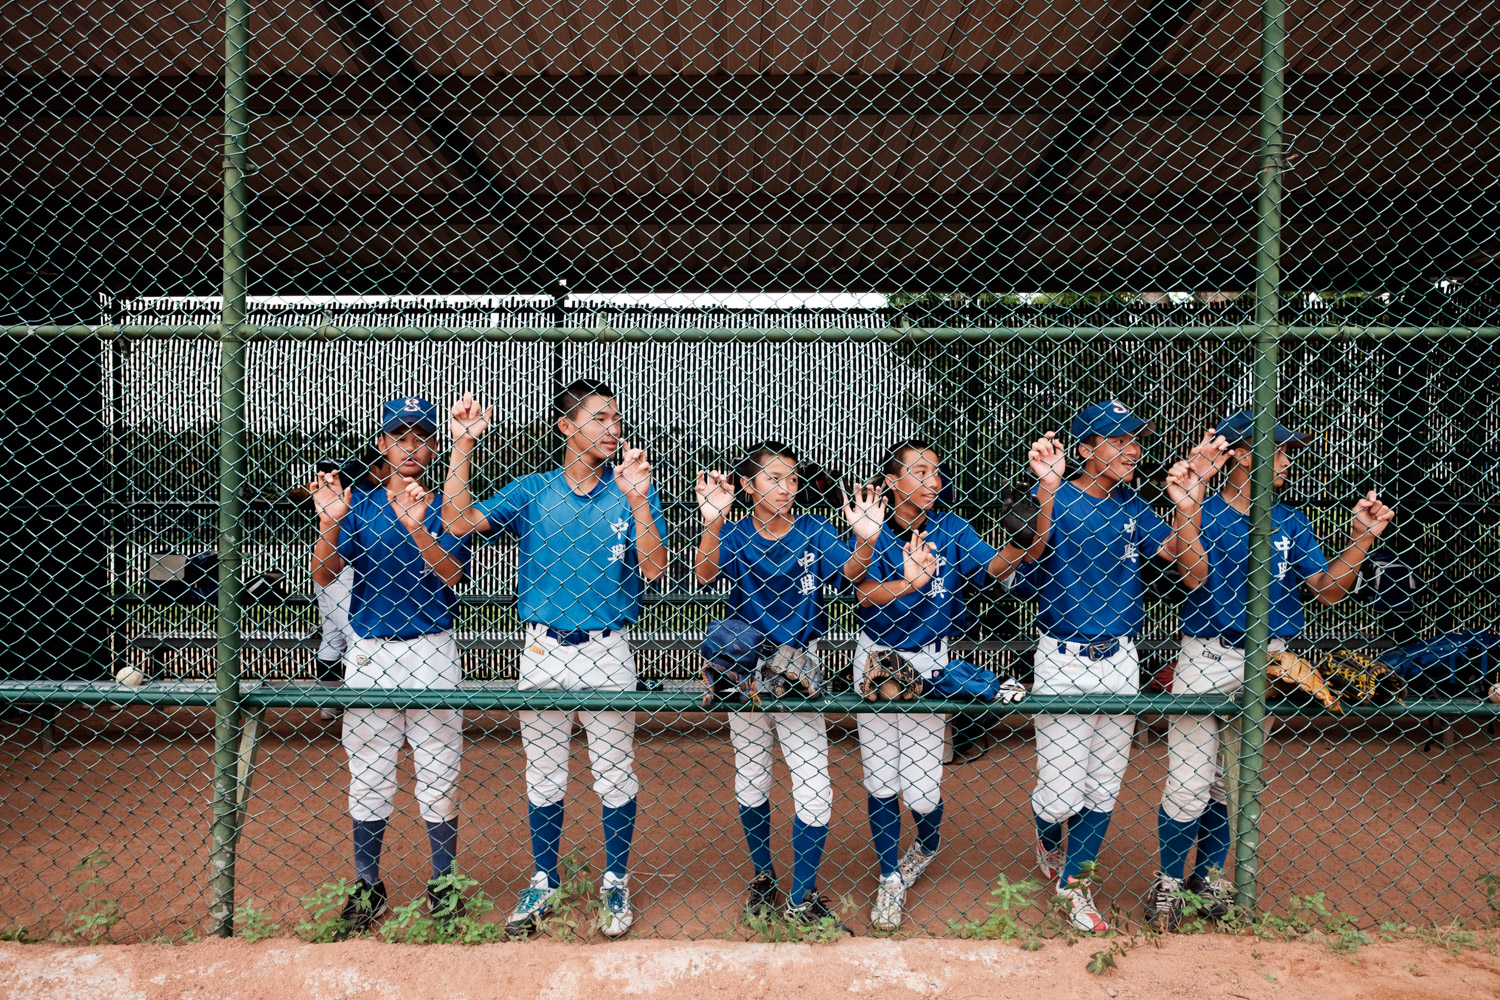  The New York Times October 2016 The Taiwan Baseball Scandal 